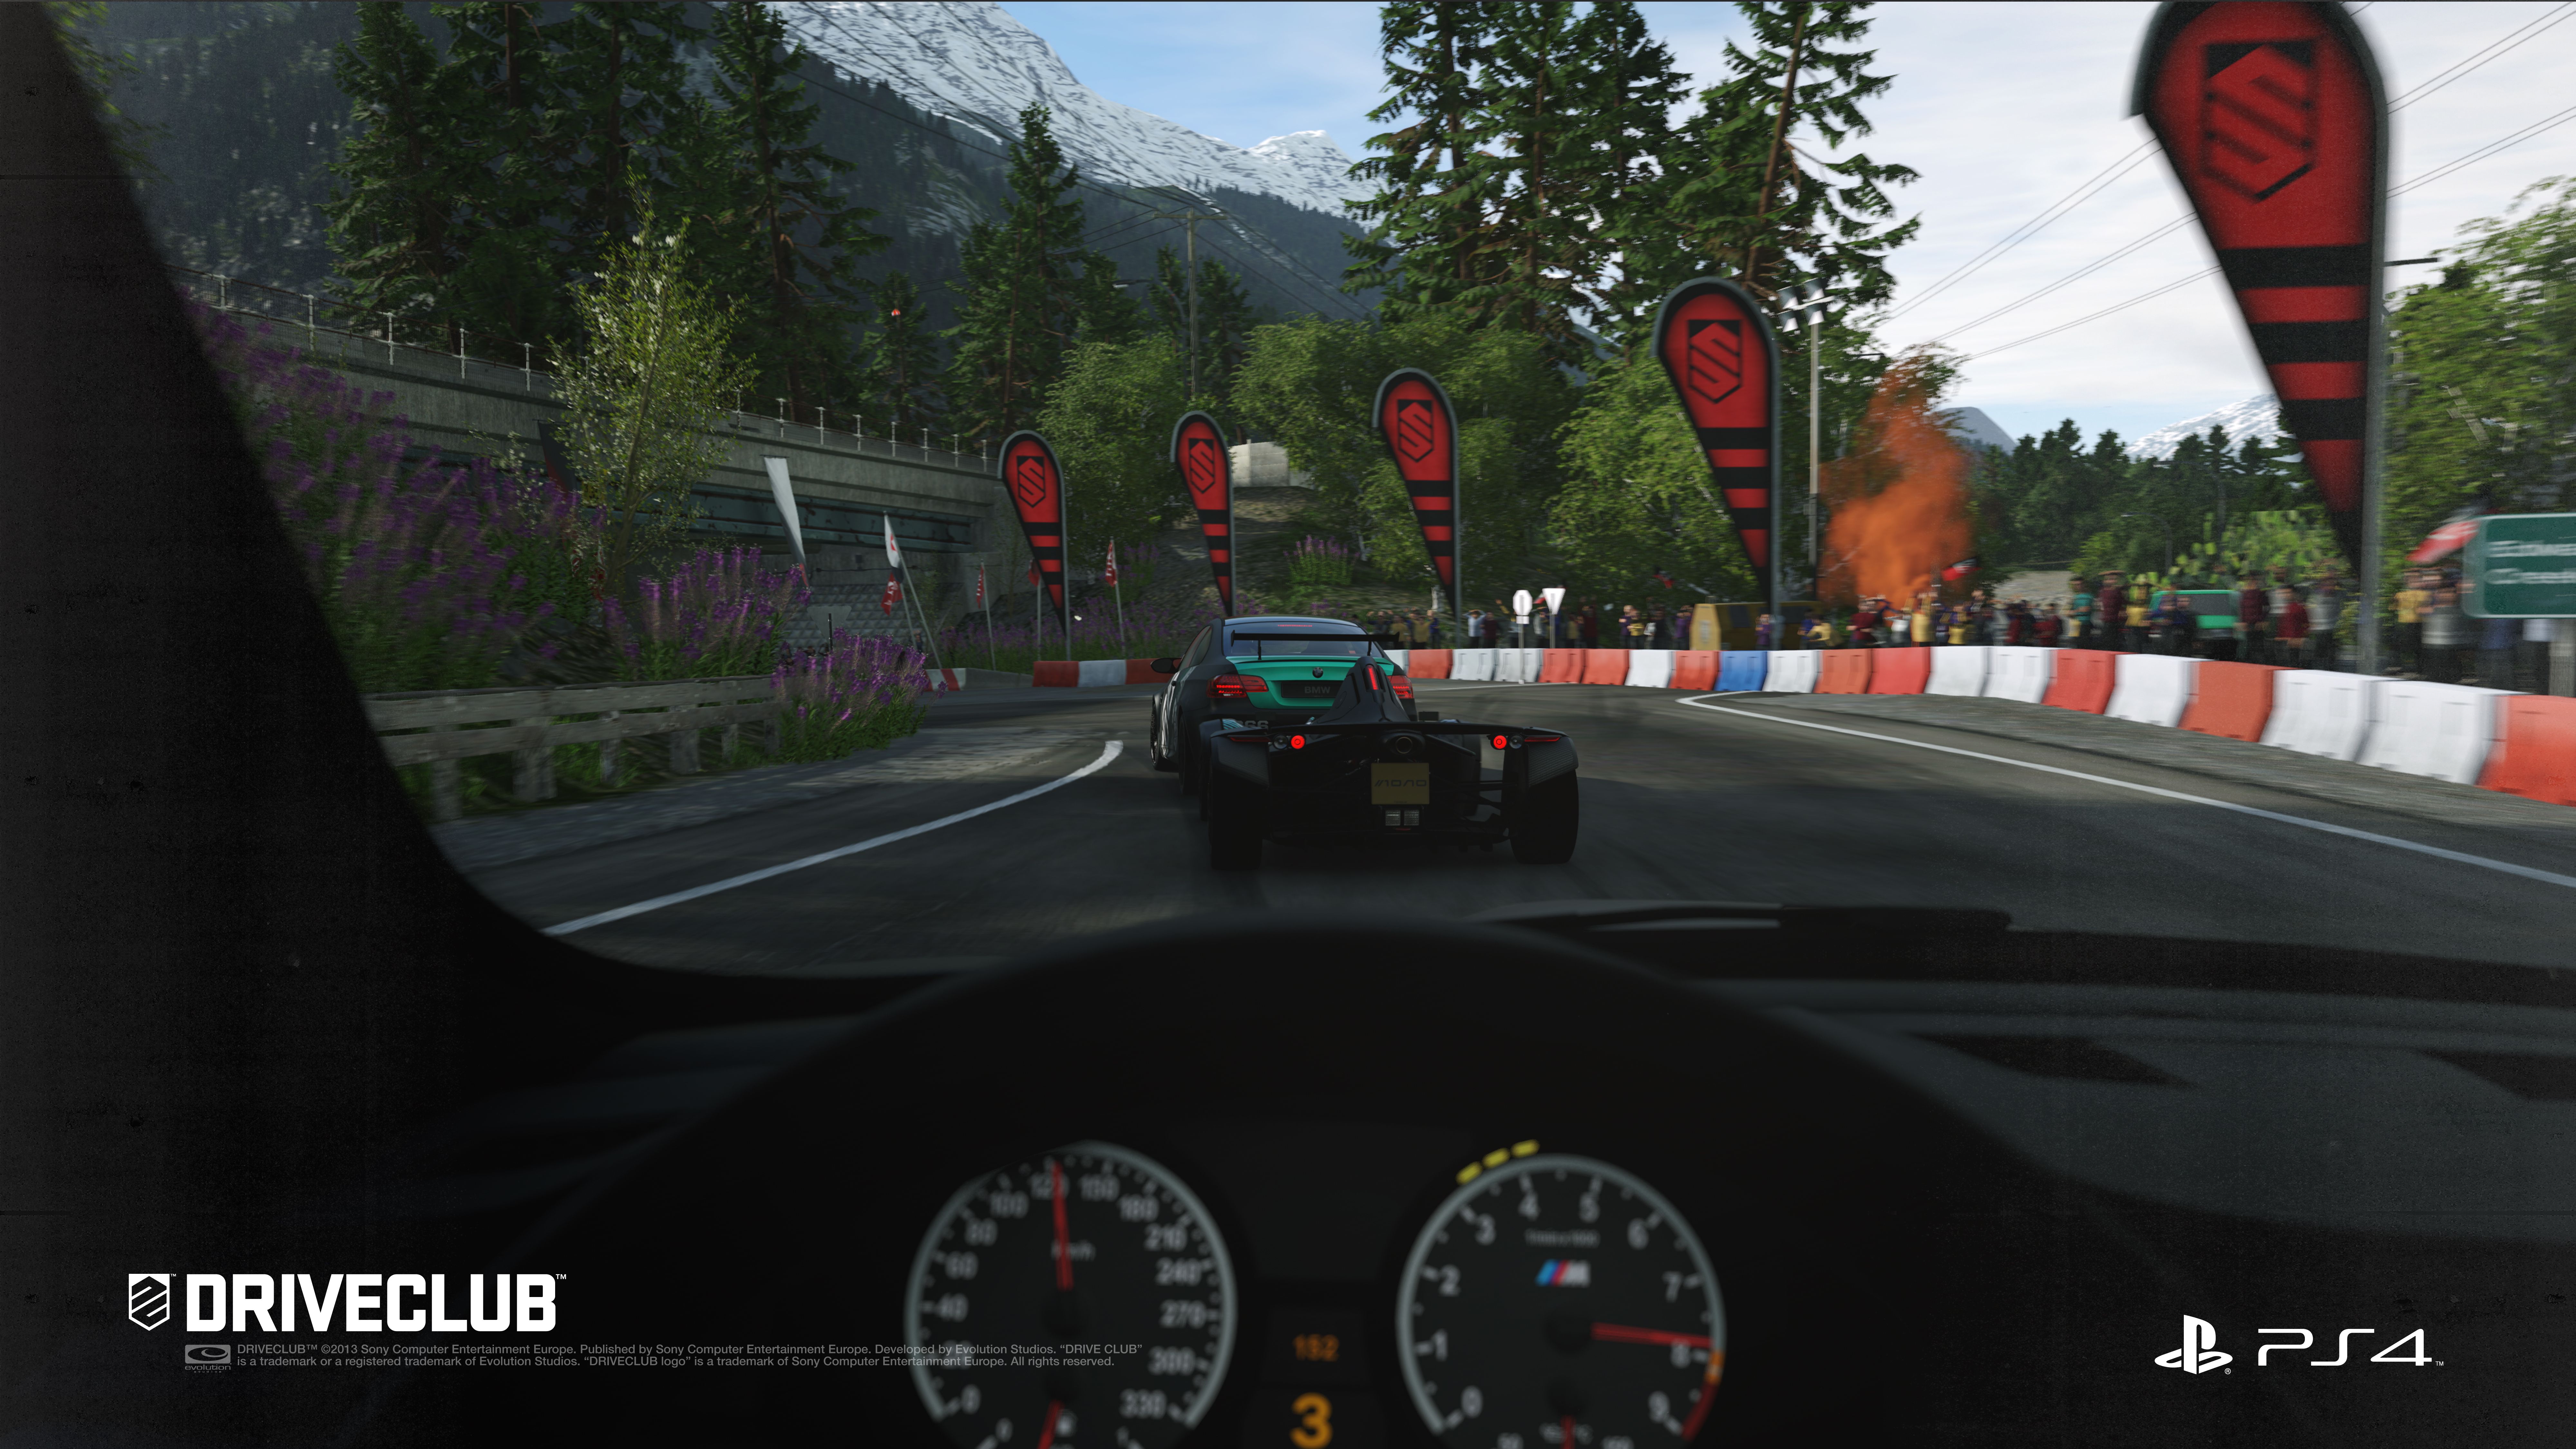 driveclub review image 4